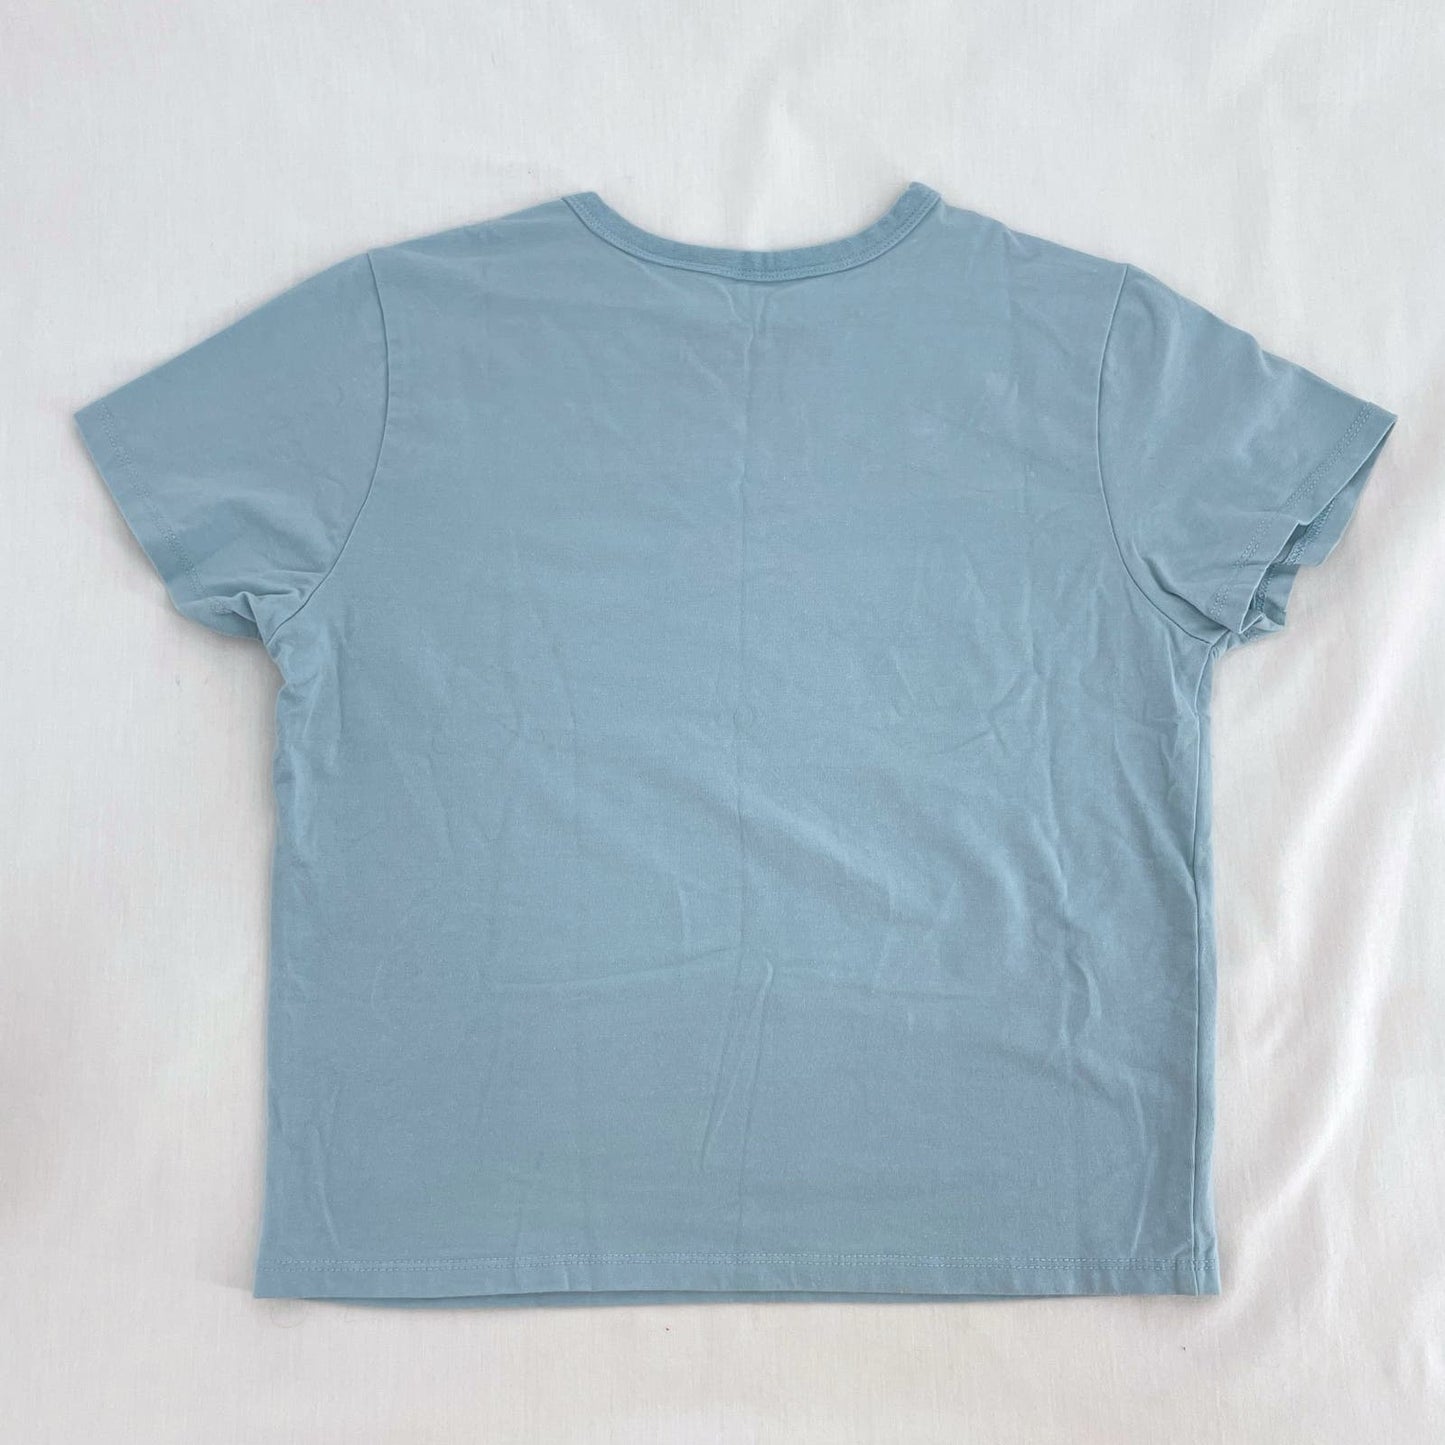 Taylor Swift Blue Baby Tee Too Soft For All Of It Sweet Nothing Midnights Heart Size M